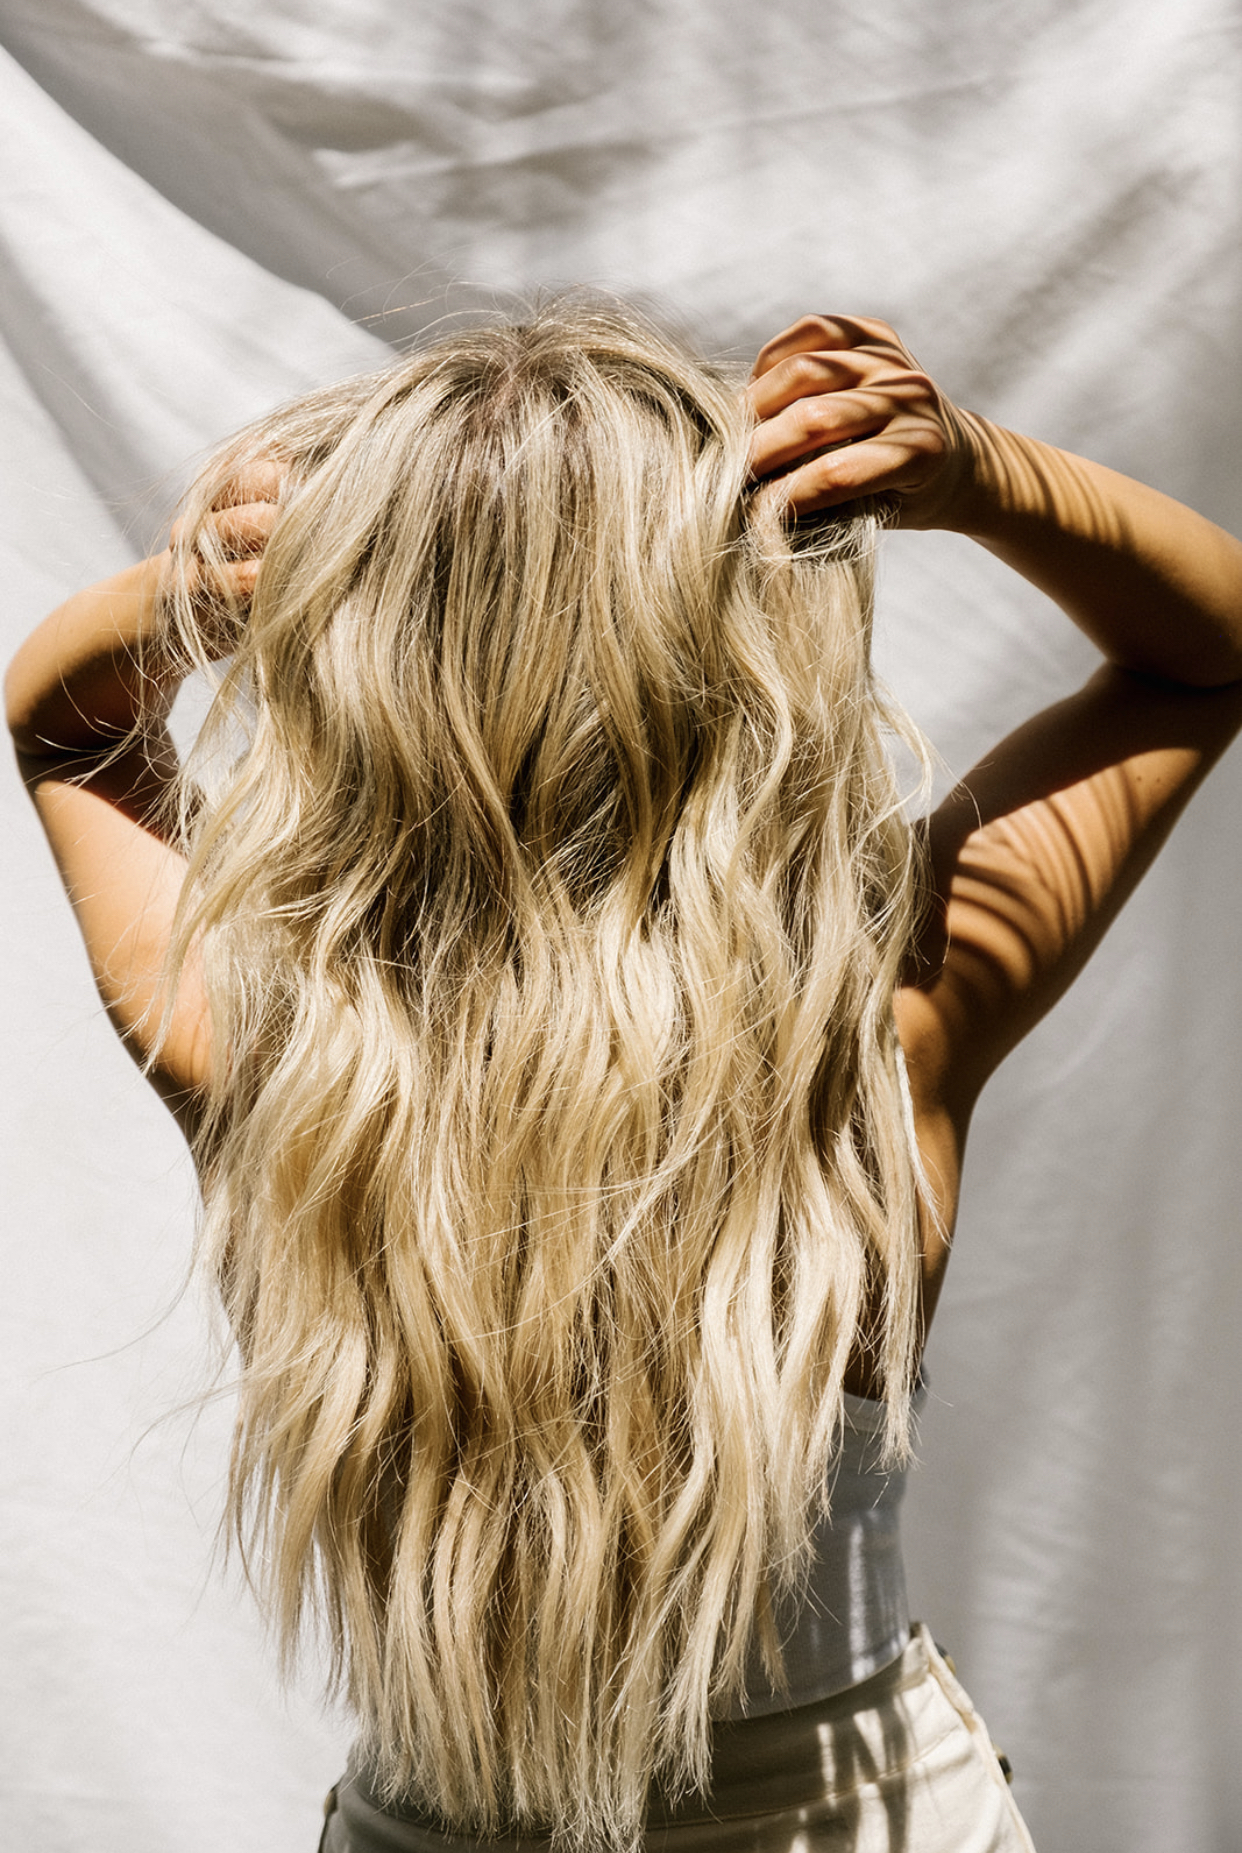 How to style your long blonde hand tied hair extensions is easy with the GHD 1.25 curling iron, which is perfect for natural looking waves! #handtiedextensions #extensions